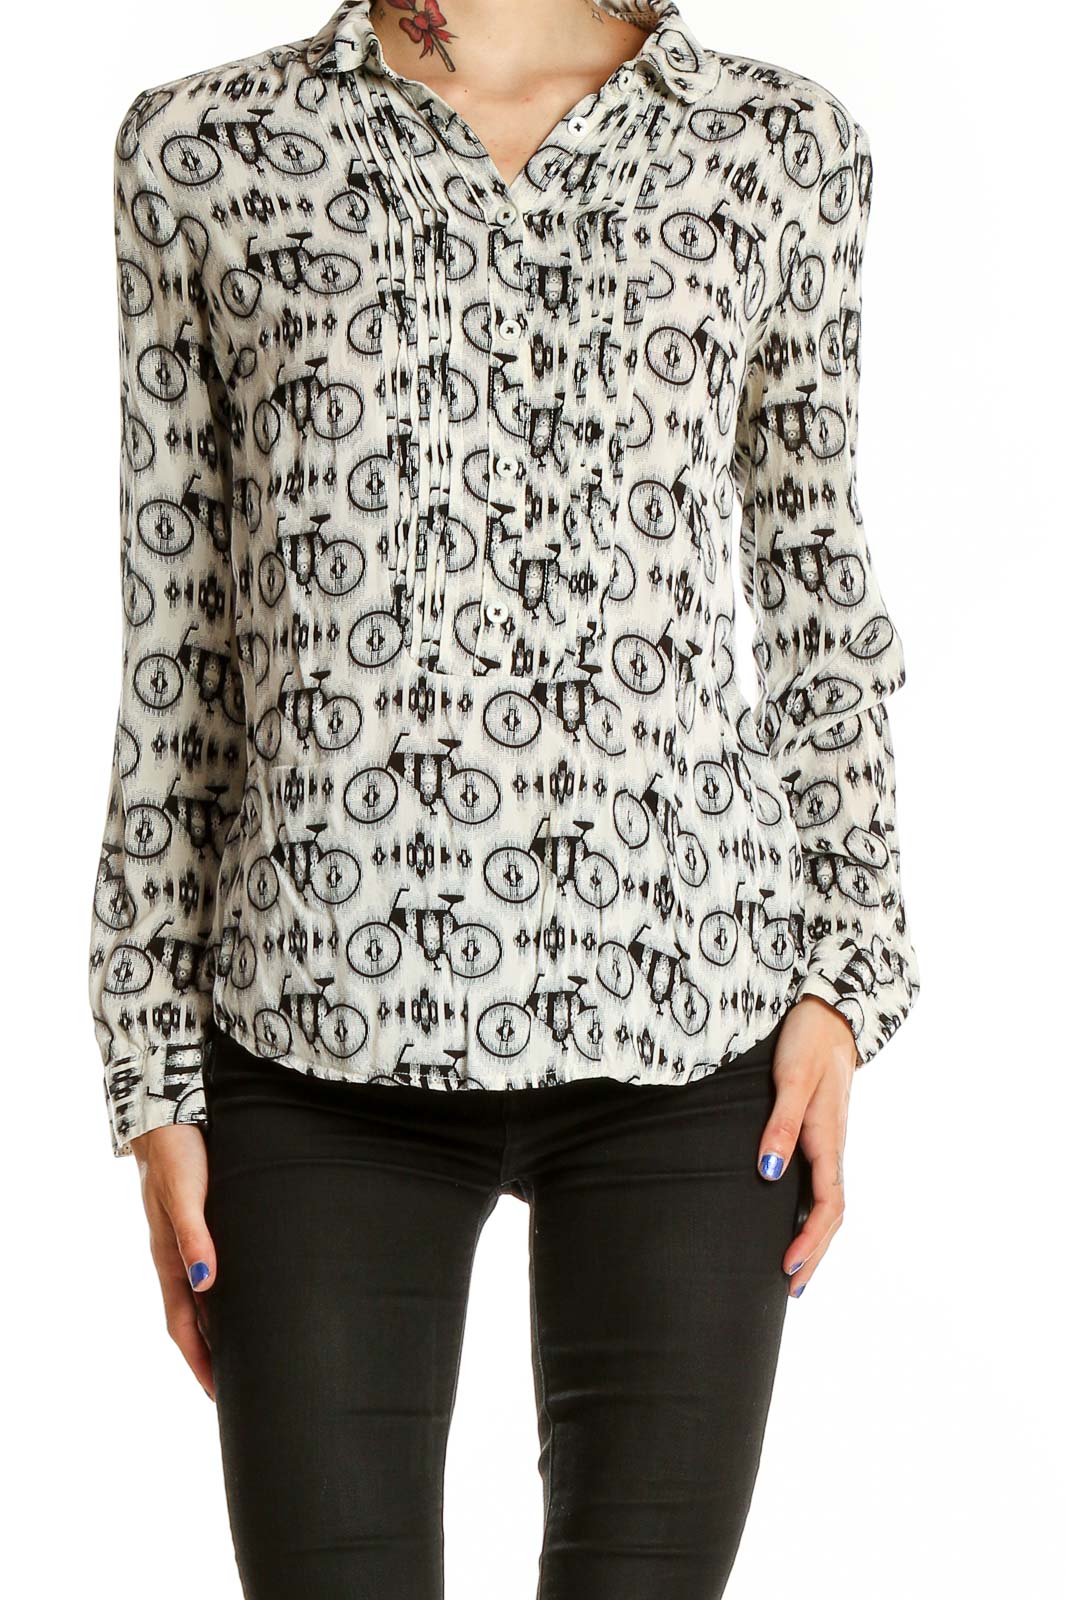 Black White Printed Blouse Front